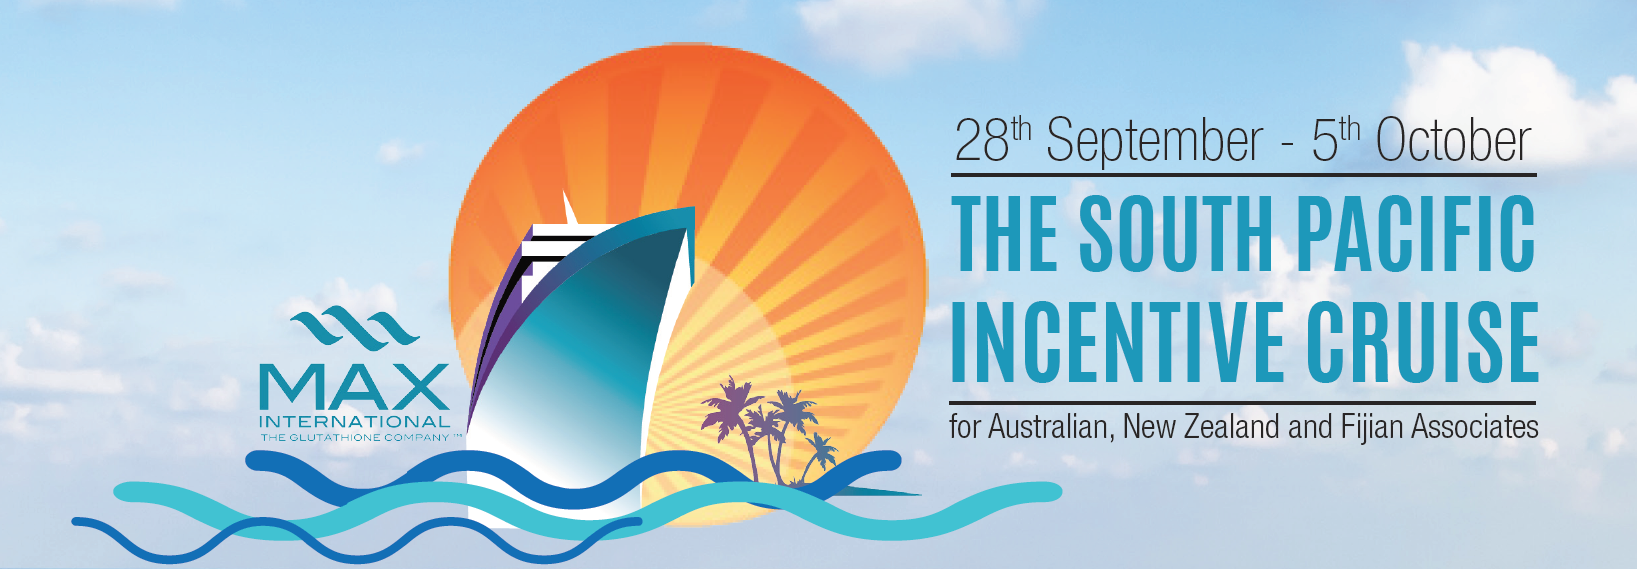 The South Pacific Incentive Cruise Banner